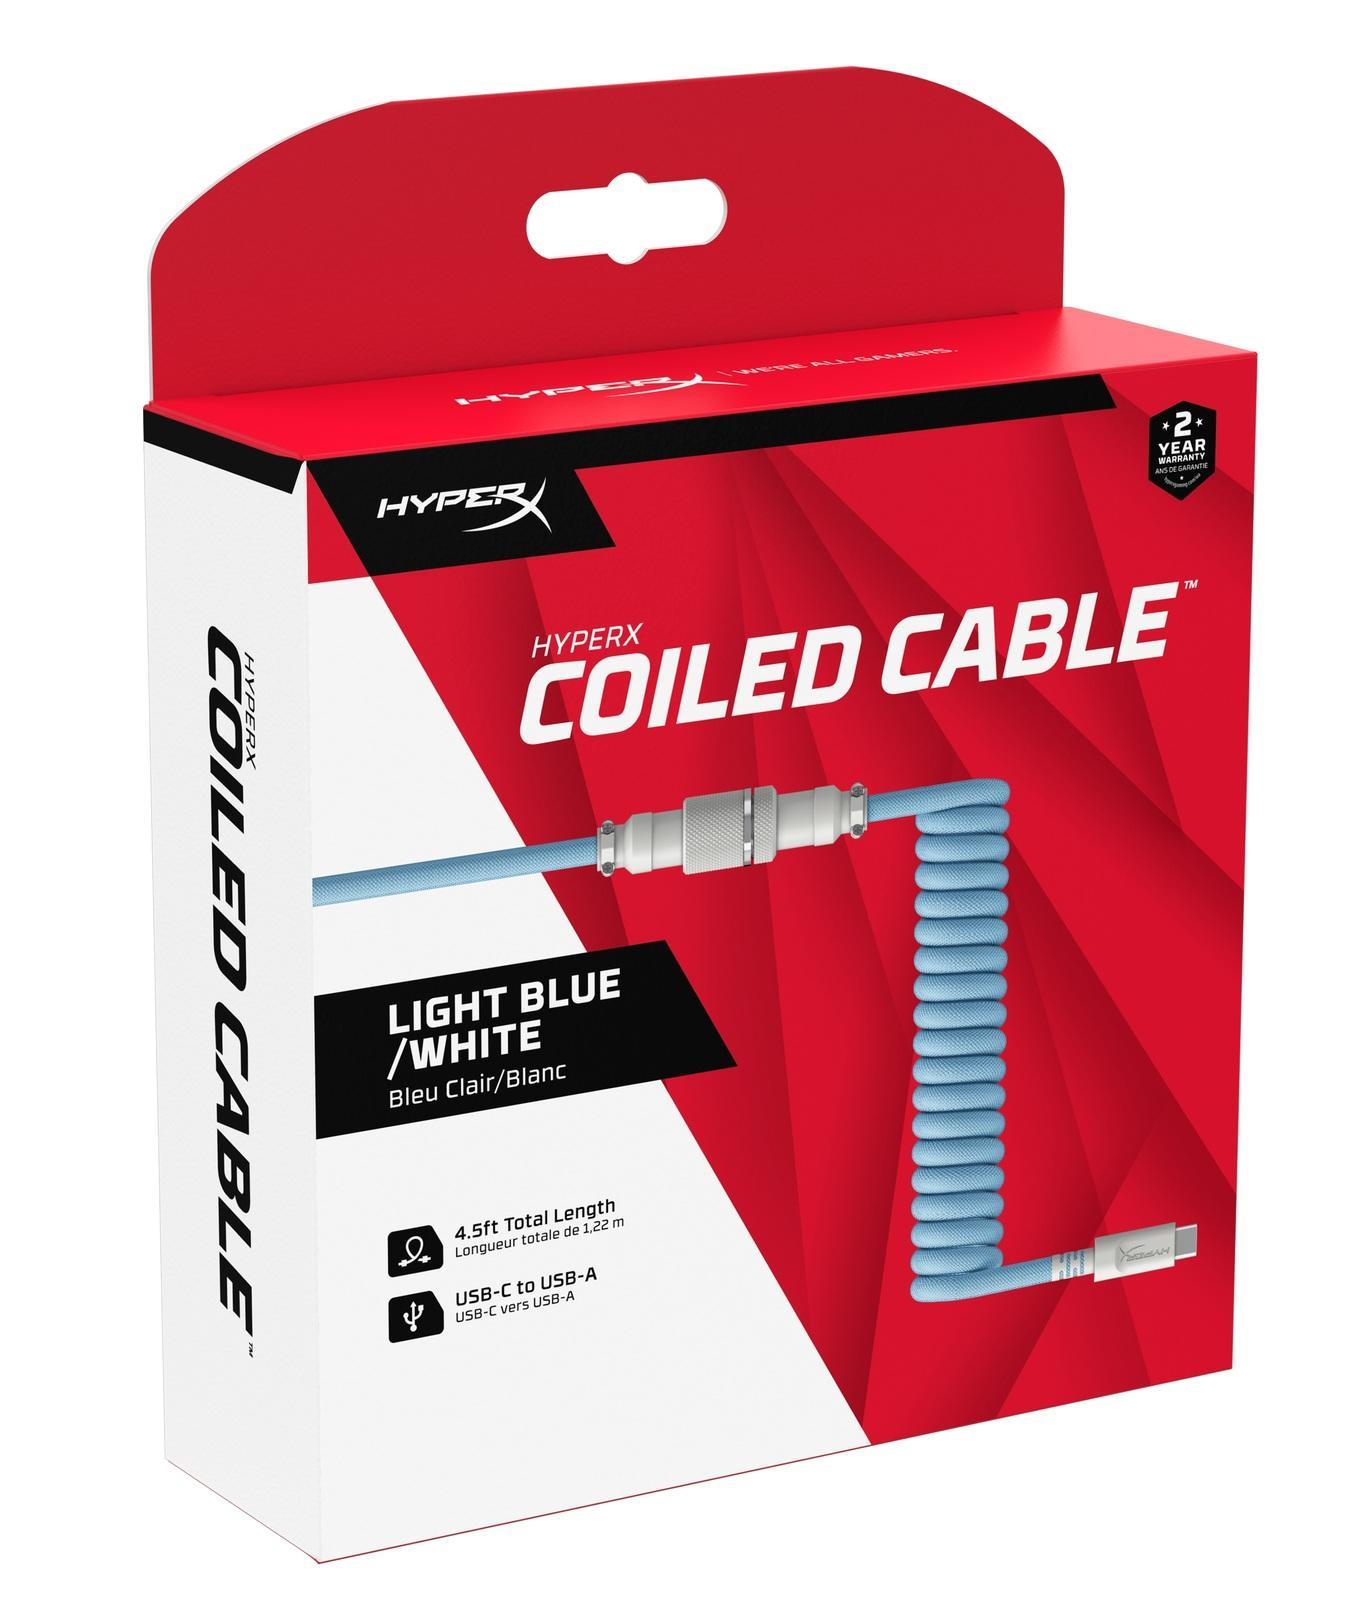 HyperX Coiled Cable (Light Blue & White)